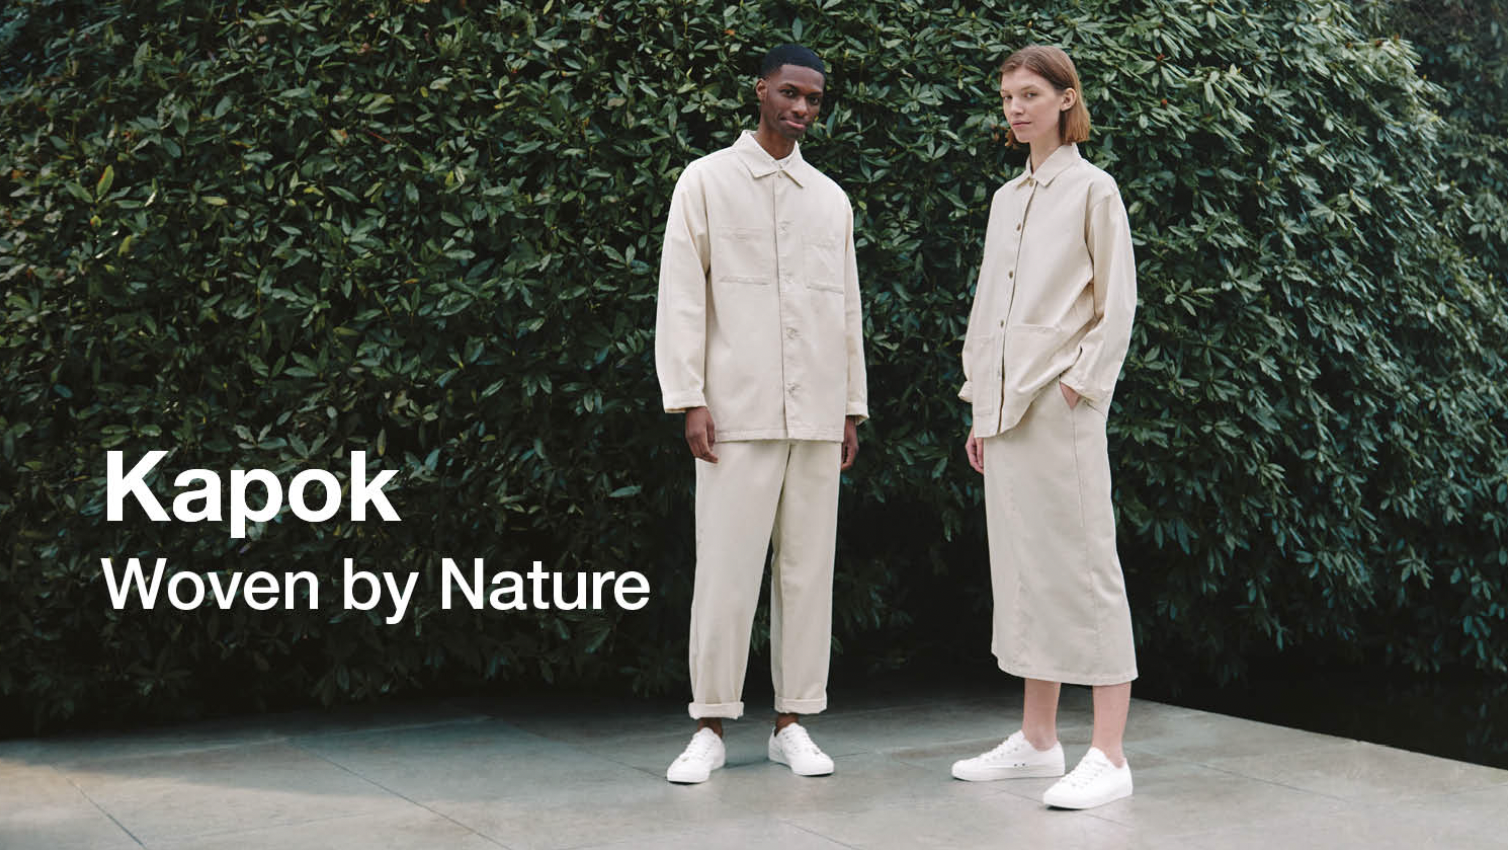 Muji launches a collection made from kapok, a basic range with low environmental impact